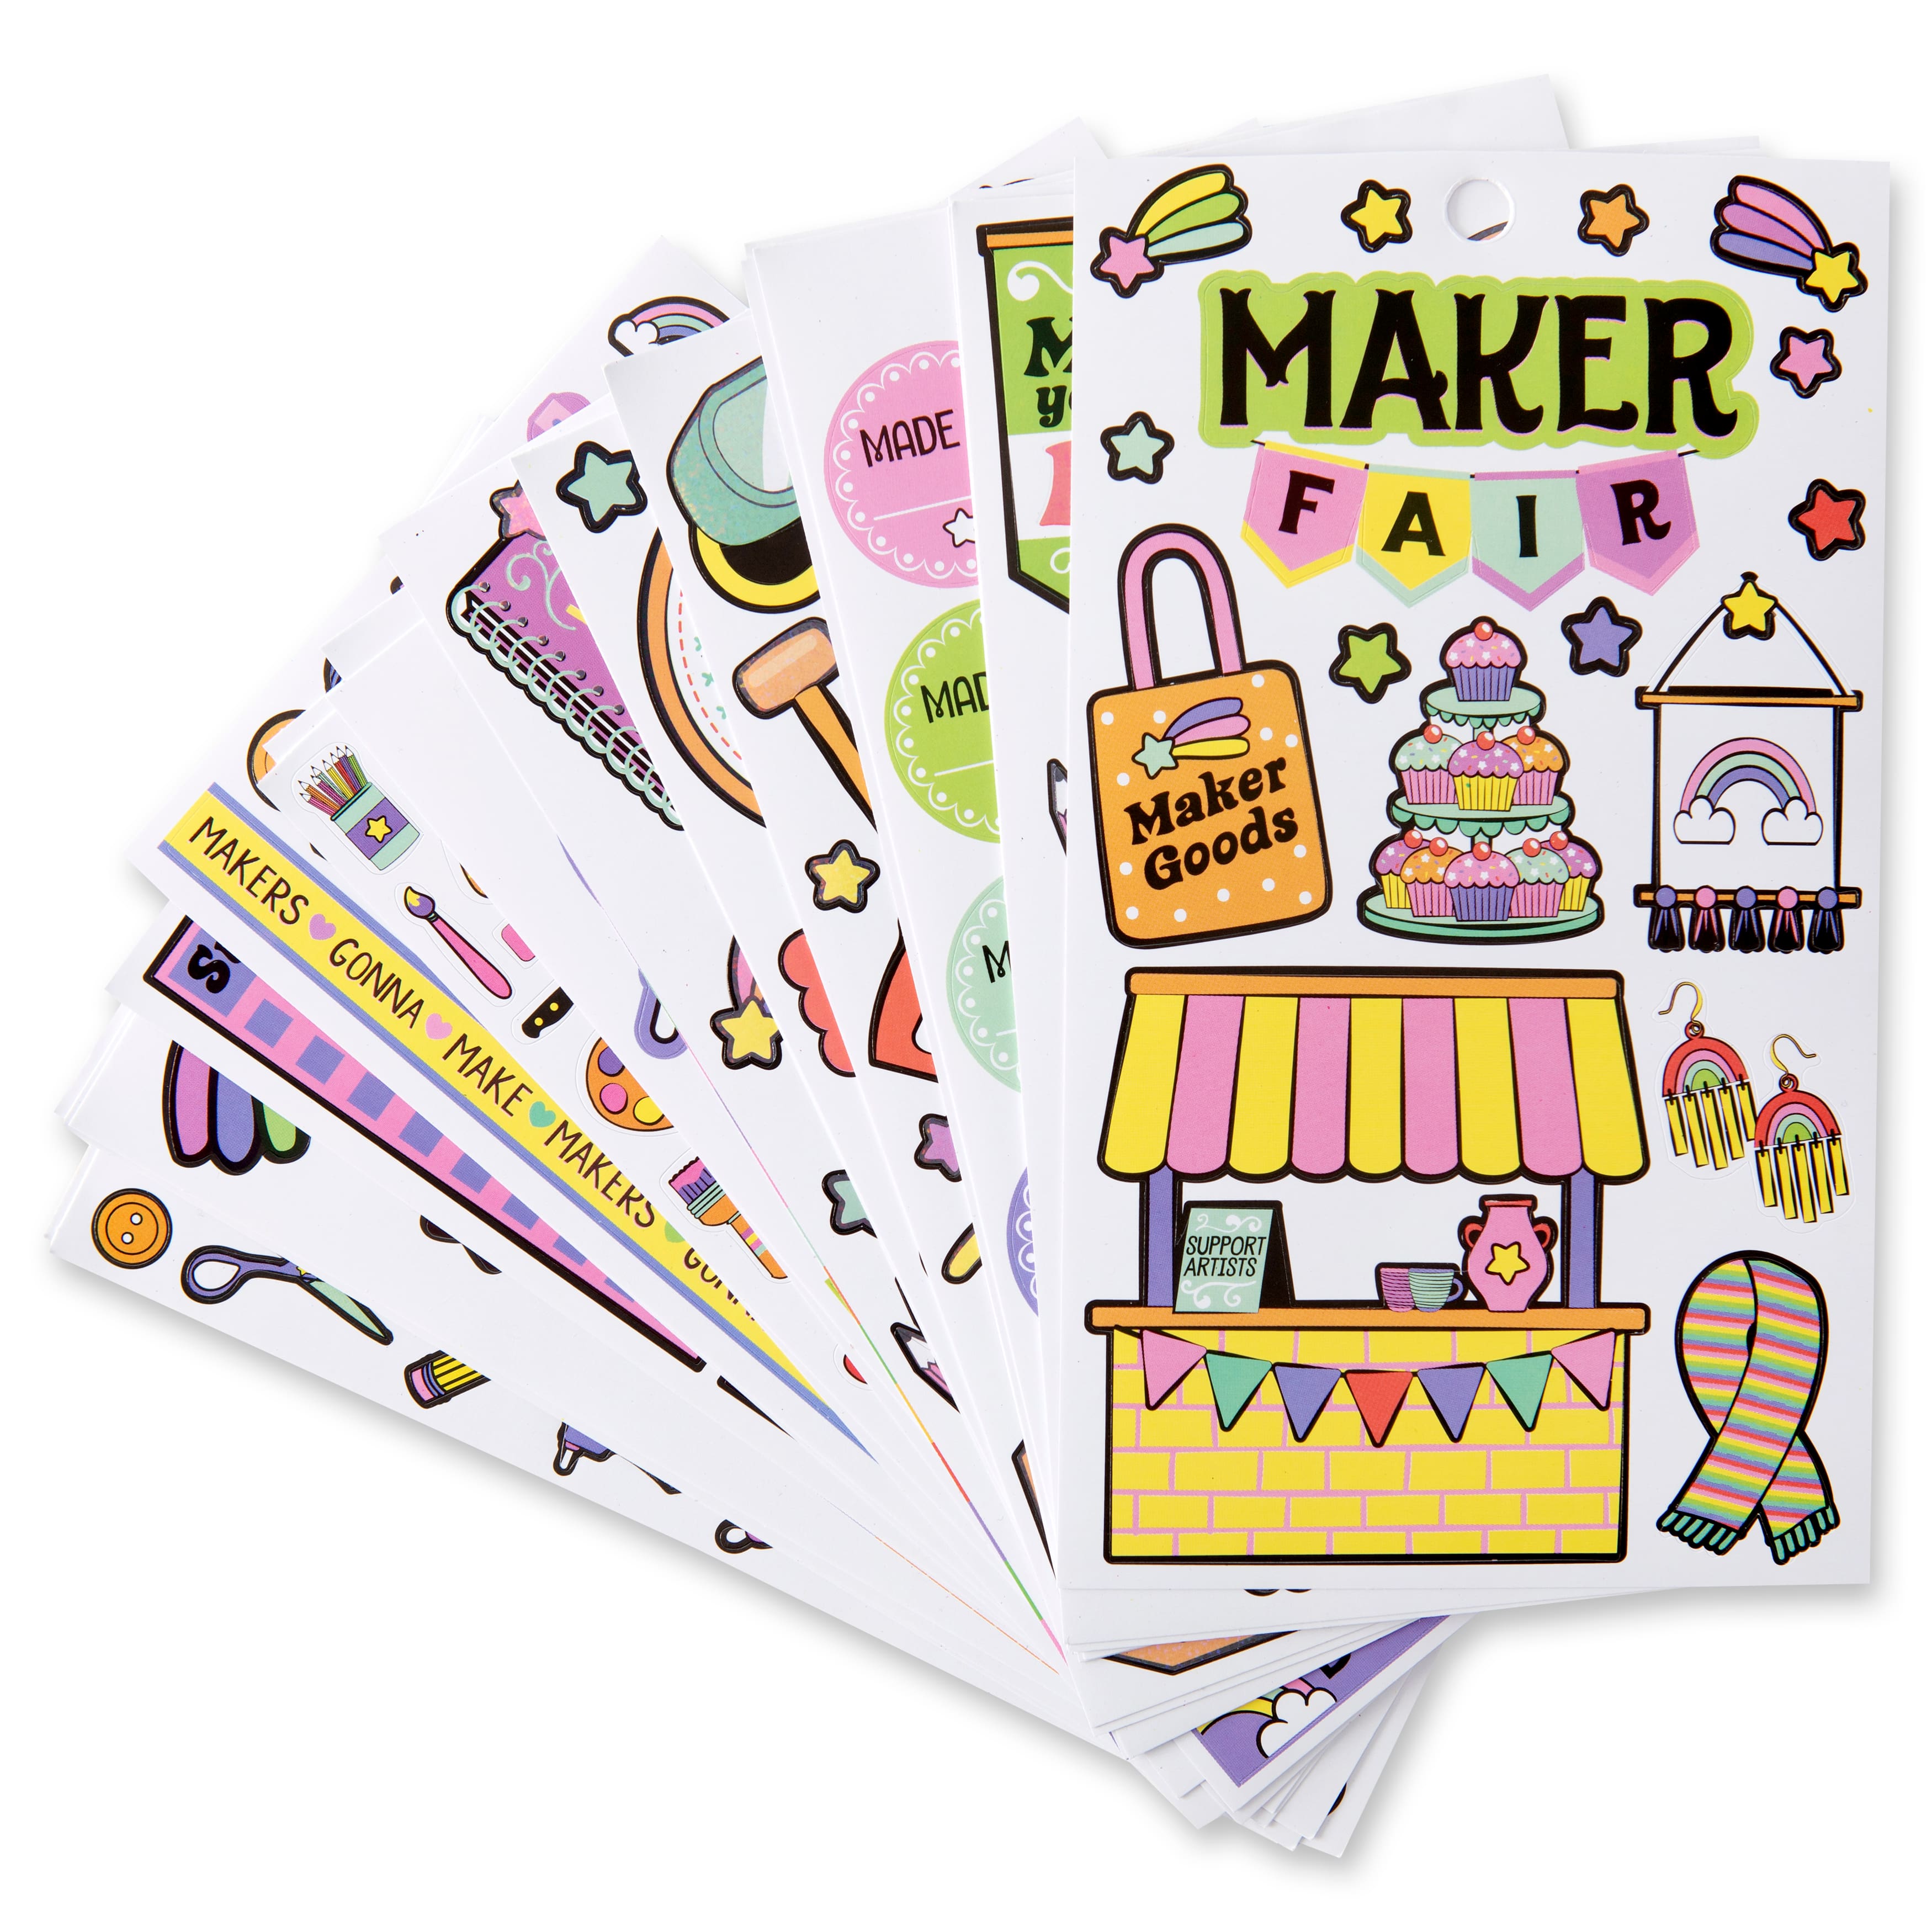 Maker Sticker Book by Recollections&#x2122;